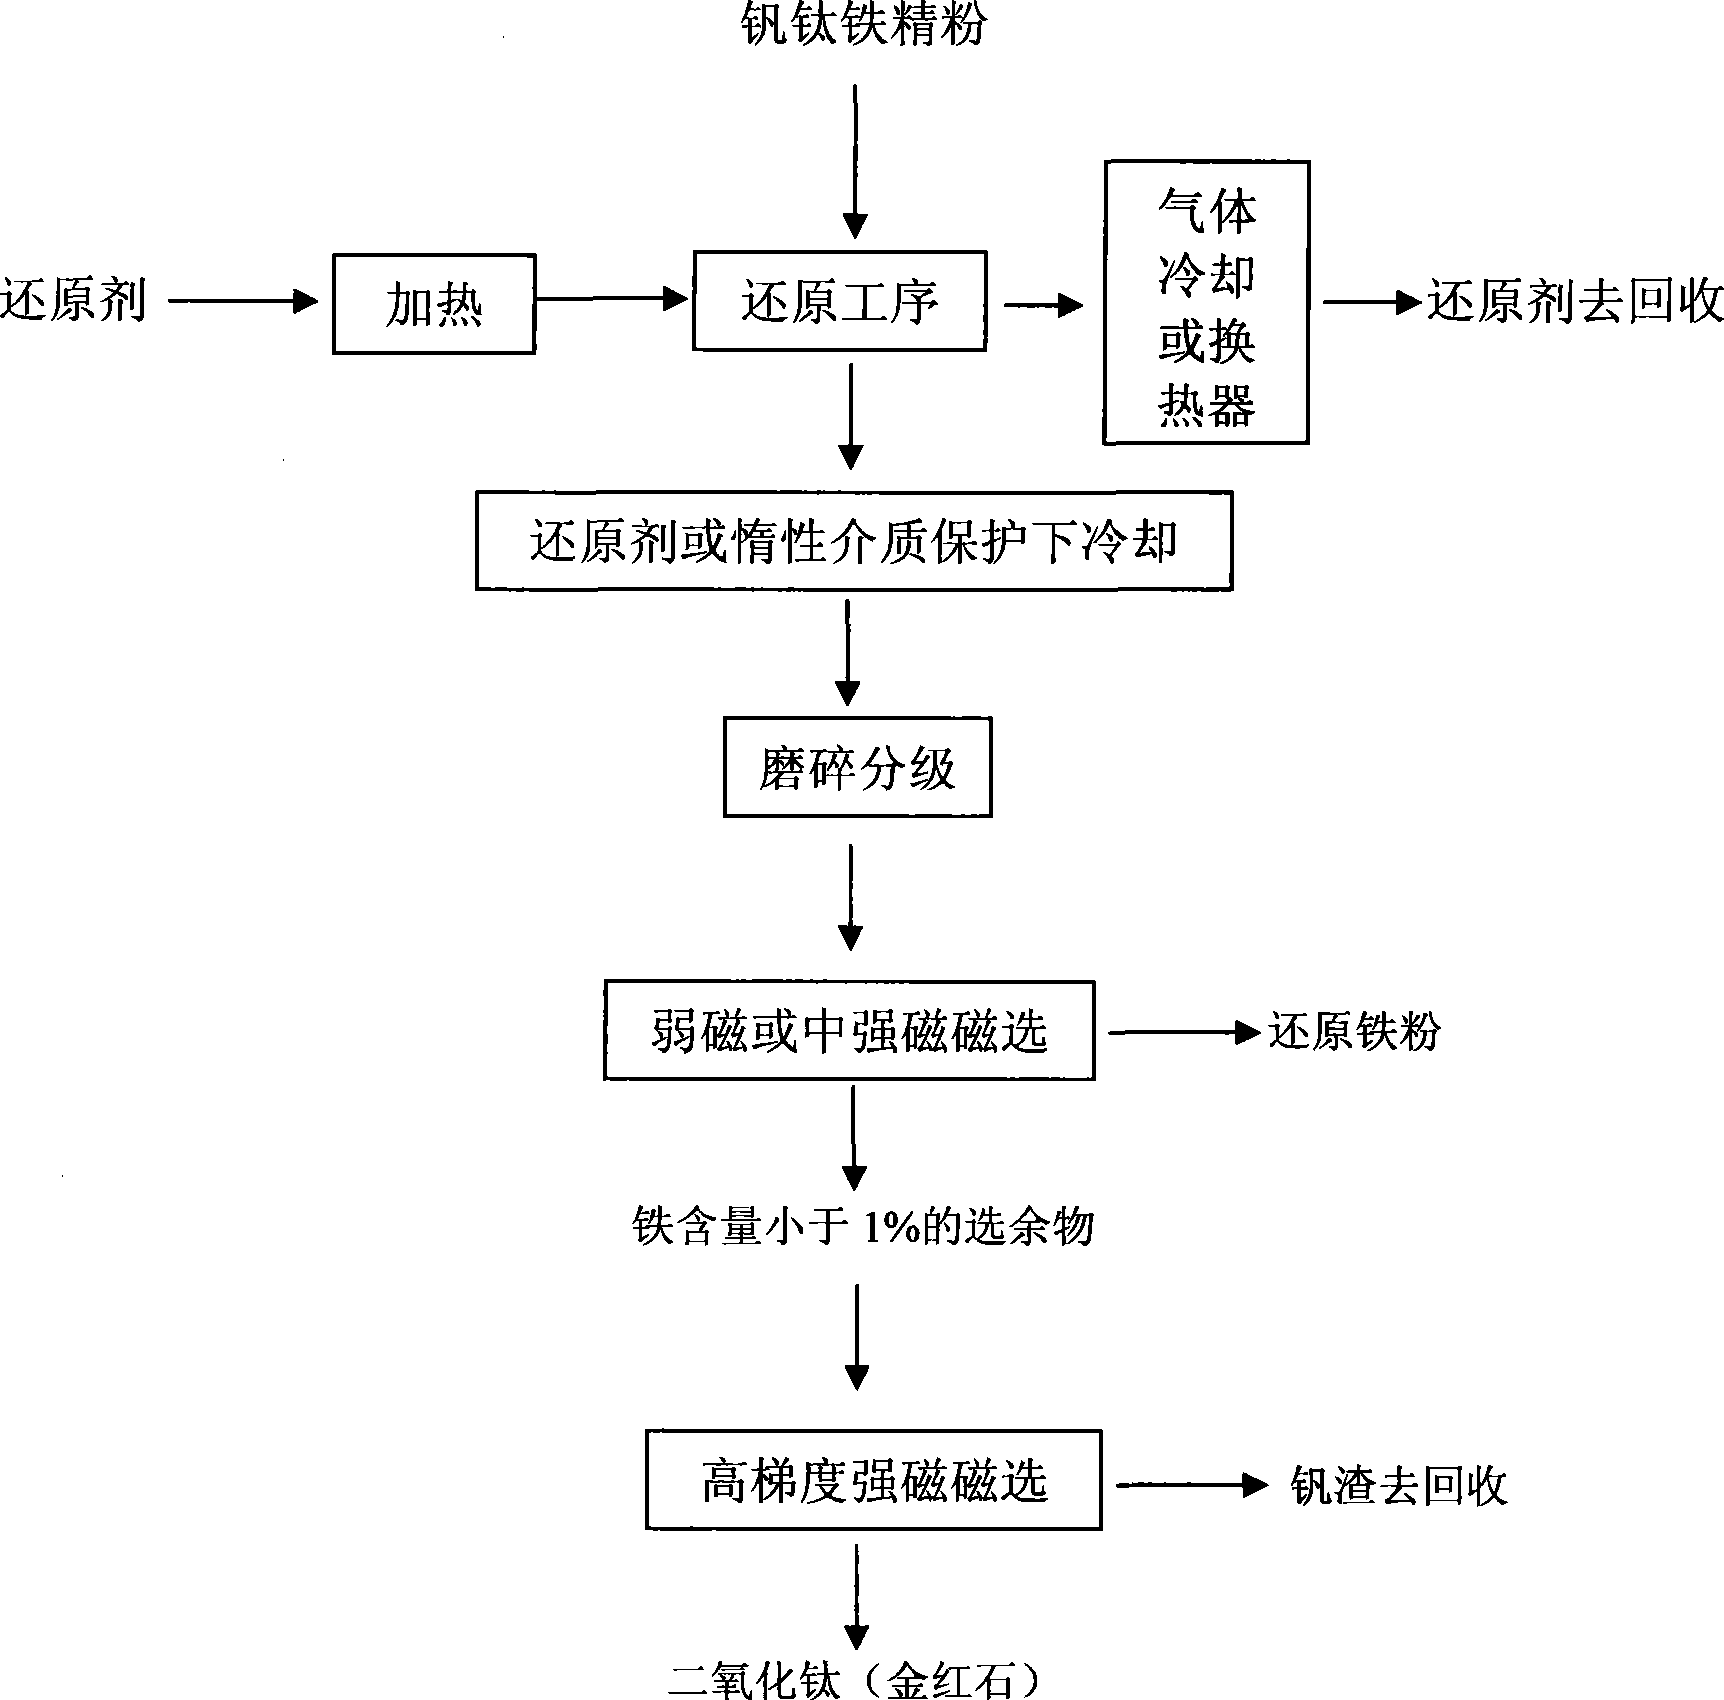 Method for separating V-Ti-Fe concentrate fines